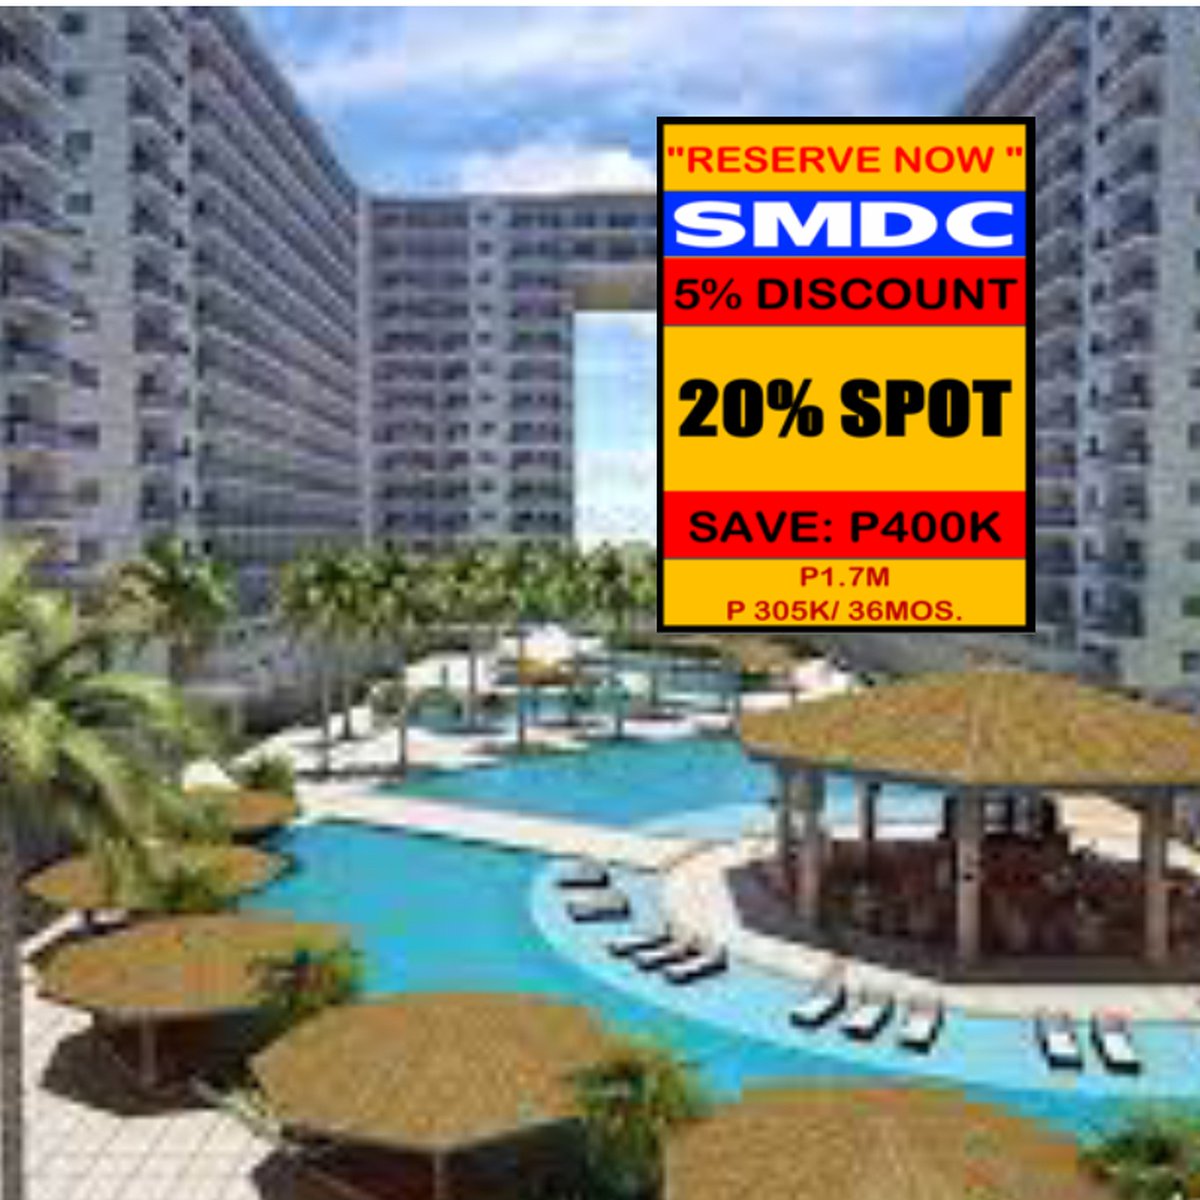 SHELL RESIDENCES Condo FOR SALE in SMDC Mall Of Asia Pasay City